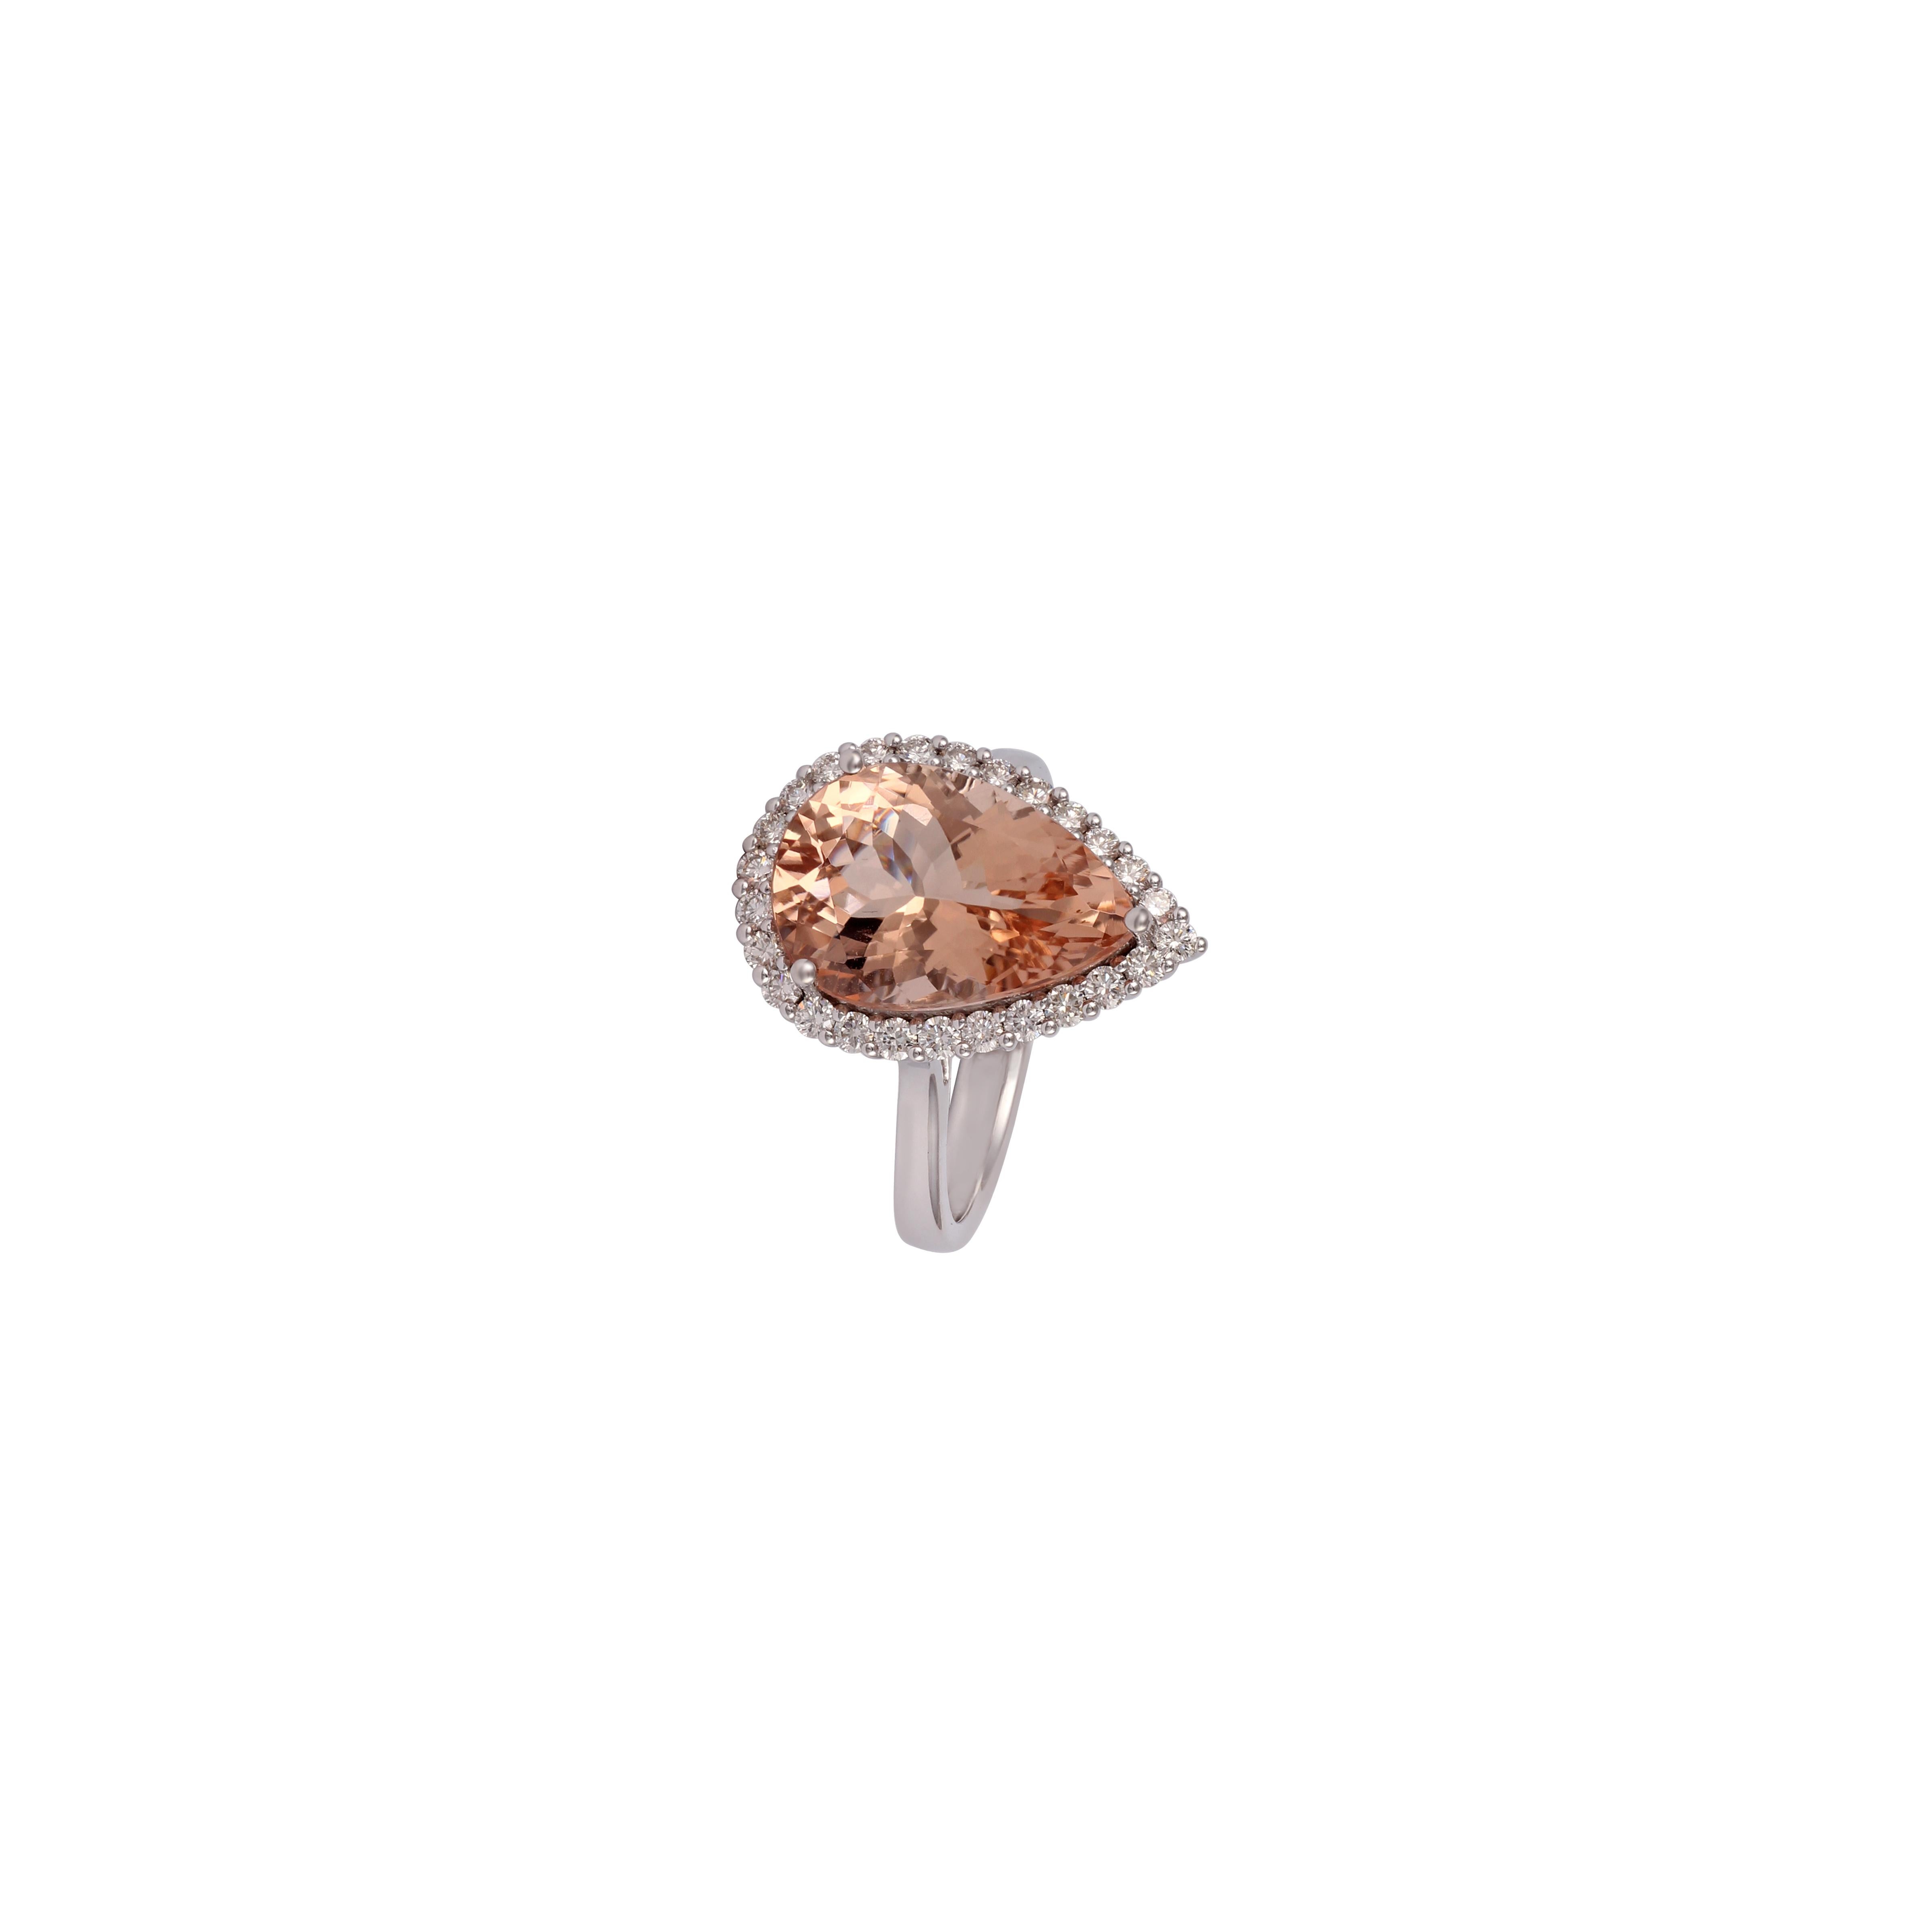 Pear Cut 4.33 Carat Morganite & Diamond Ring Studded in 18K White Gold For Sale